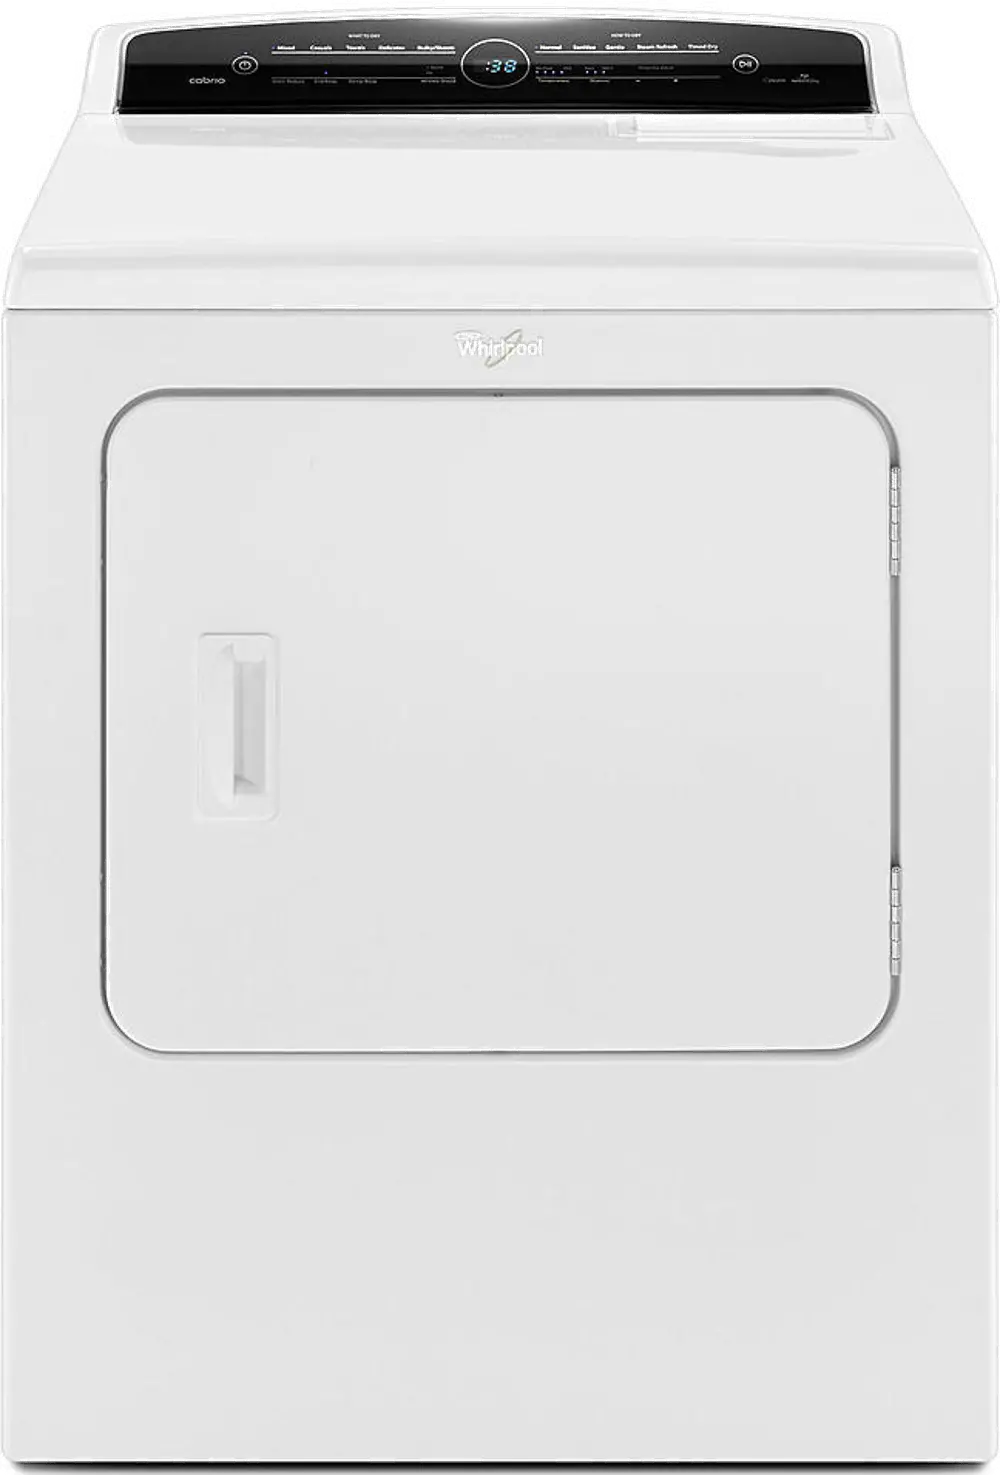 WED7300DW Whirlpool 7.0 cu. ft. Front Load Electric Dryer - White-1